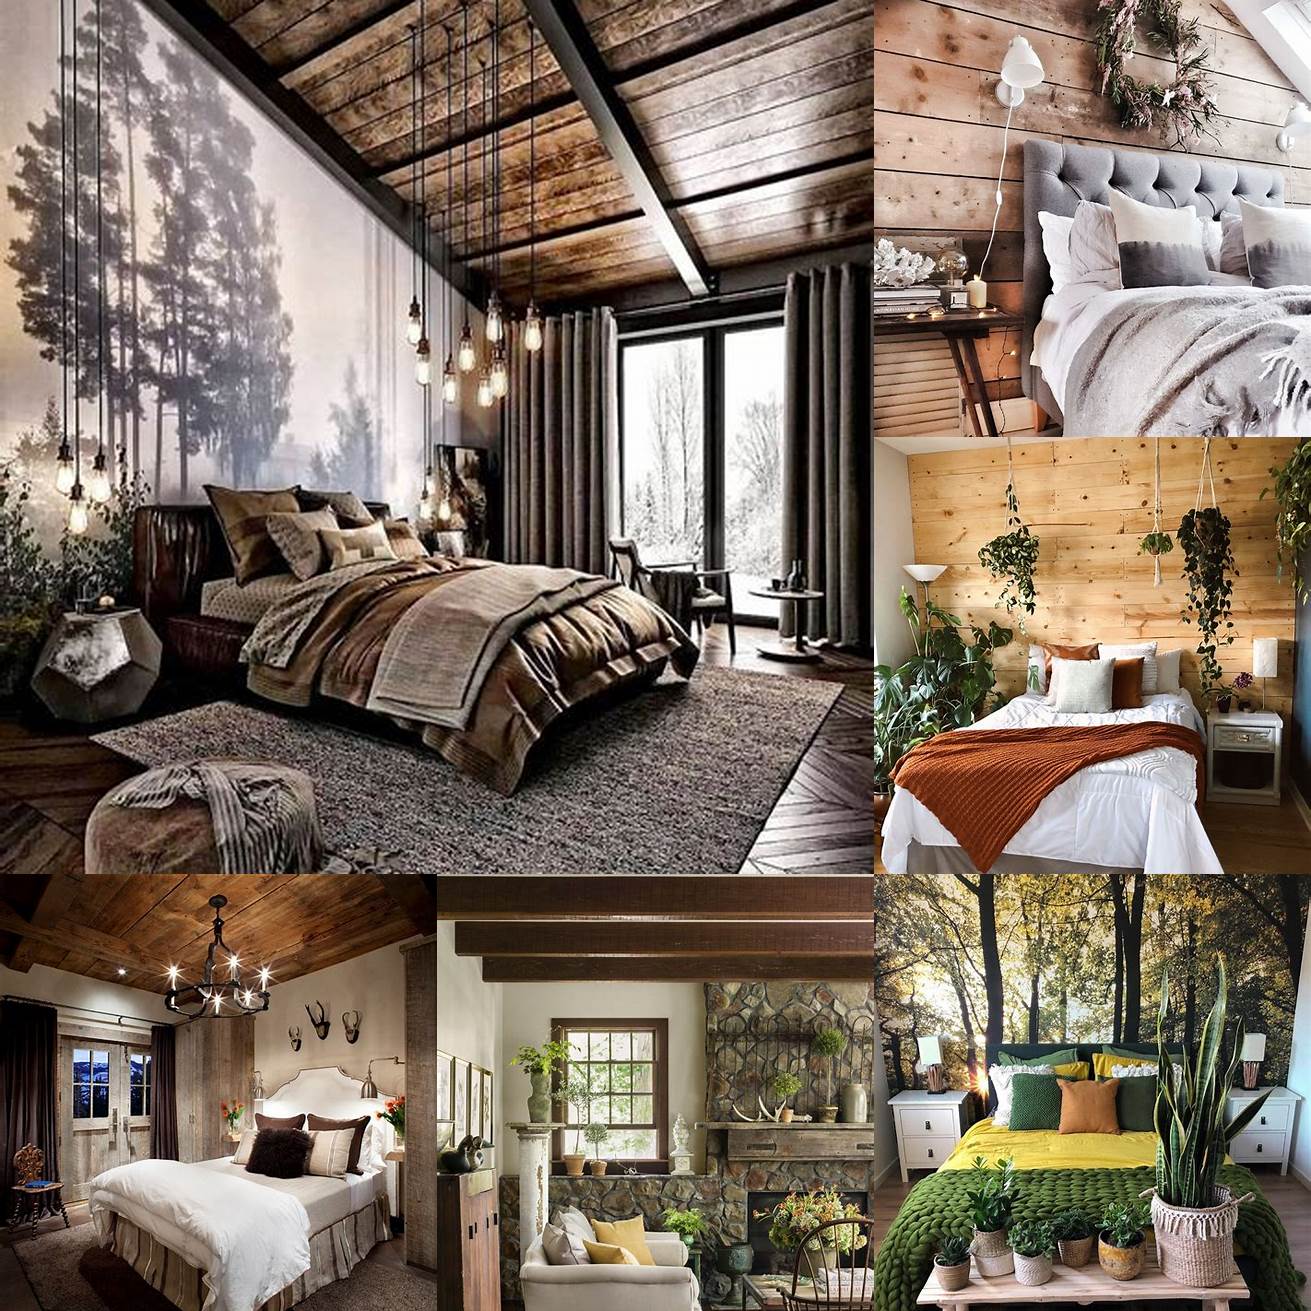 A rustic bedroom brings the beauty of nature indoors The warm colors and natural materials create a cozy and welcoming atmosphere that is perfect for snuggling up on a cold night